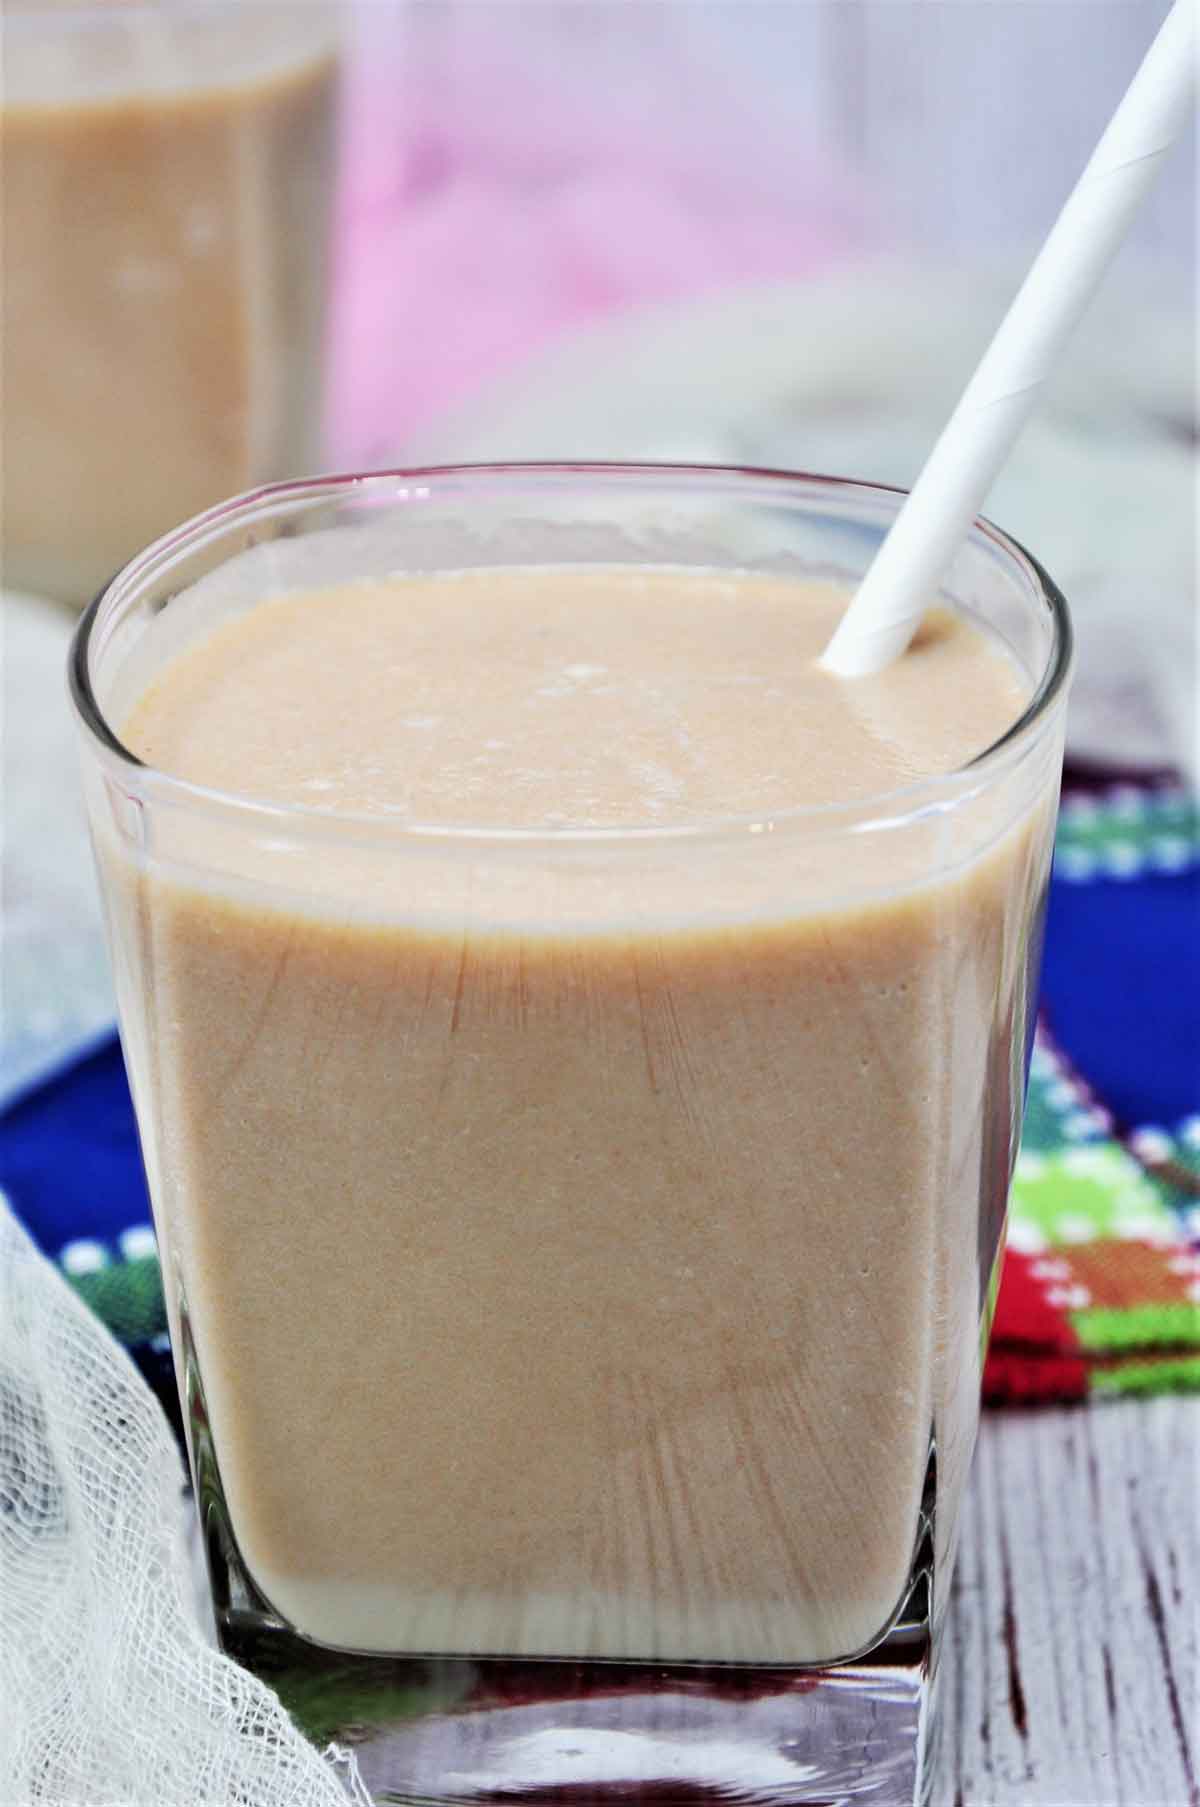 Chikoo milkshake served in a glass with straw,